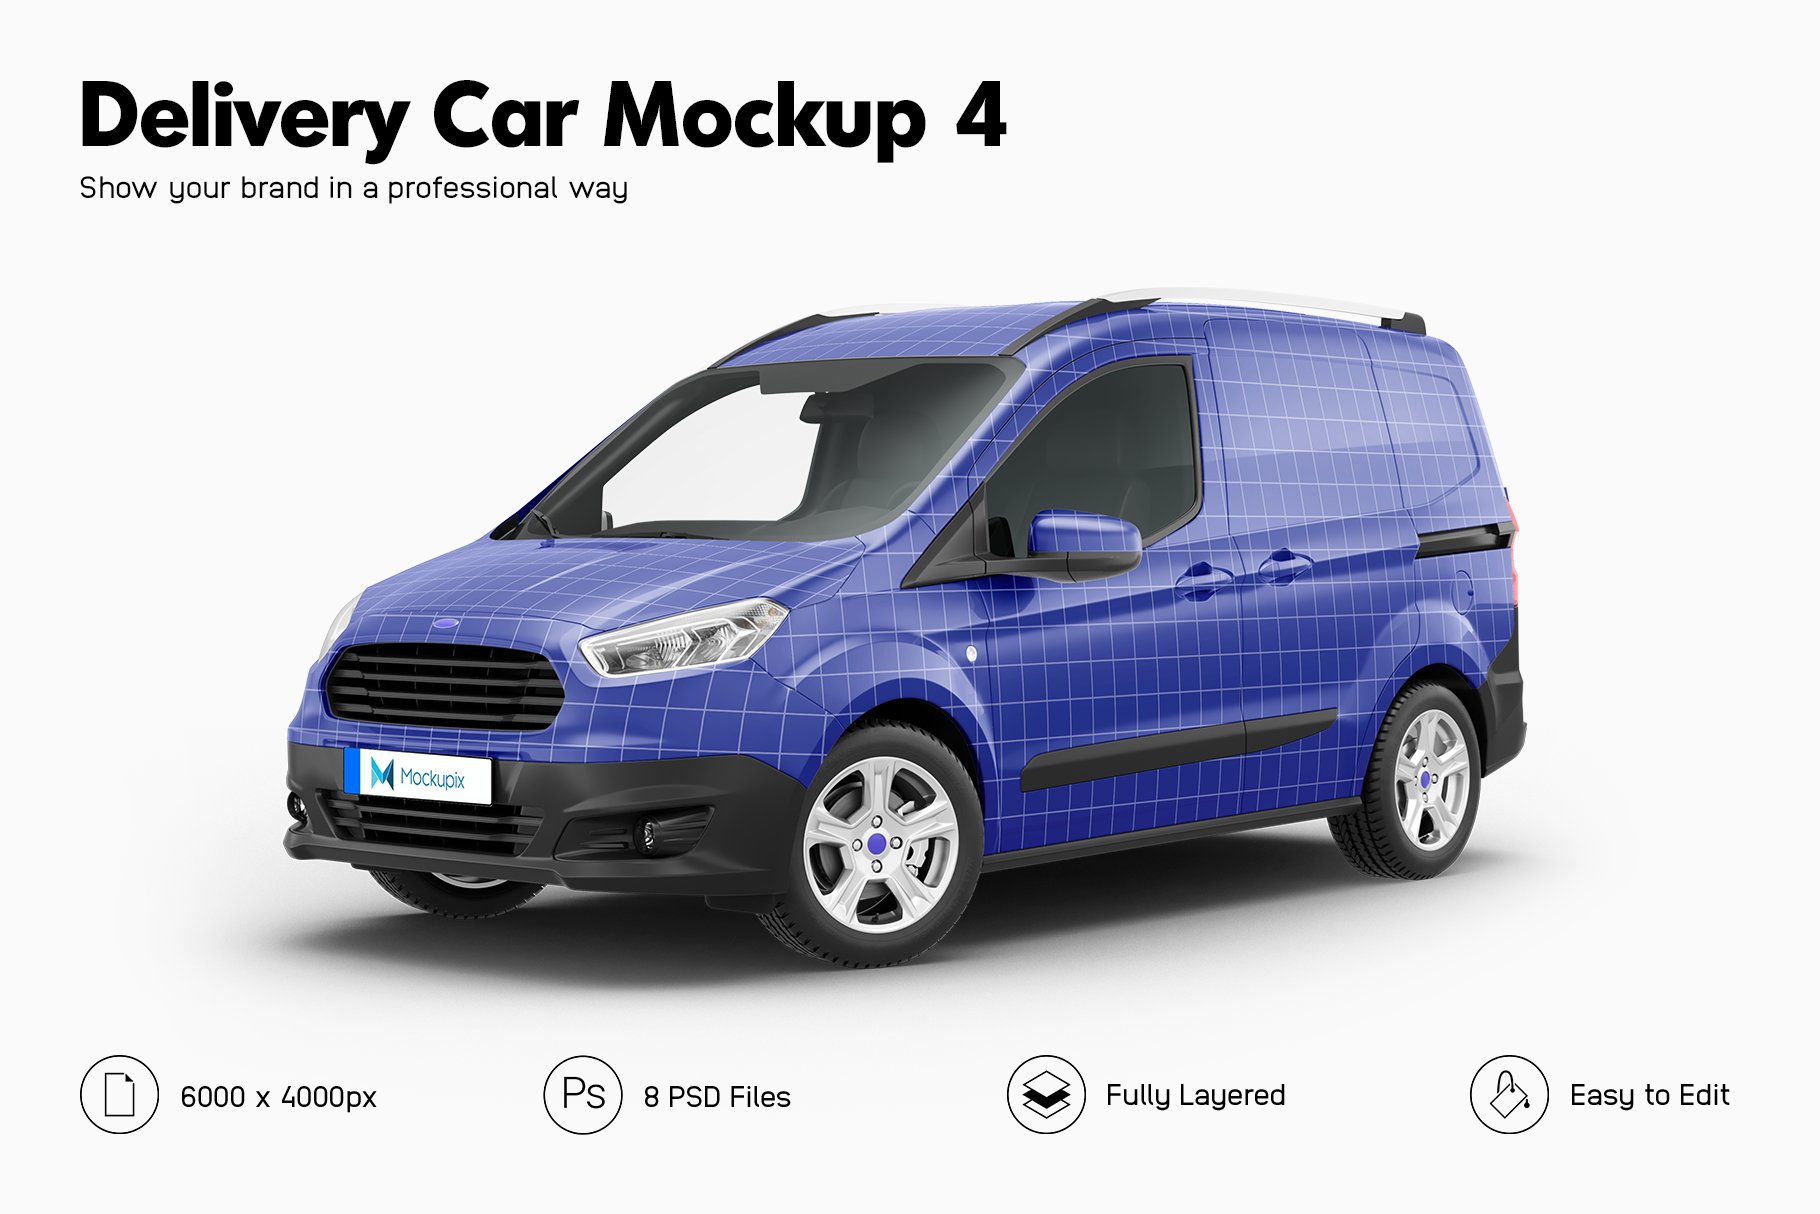 Delivery Car Mockup 4 cover image.